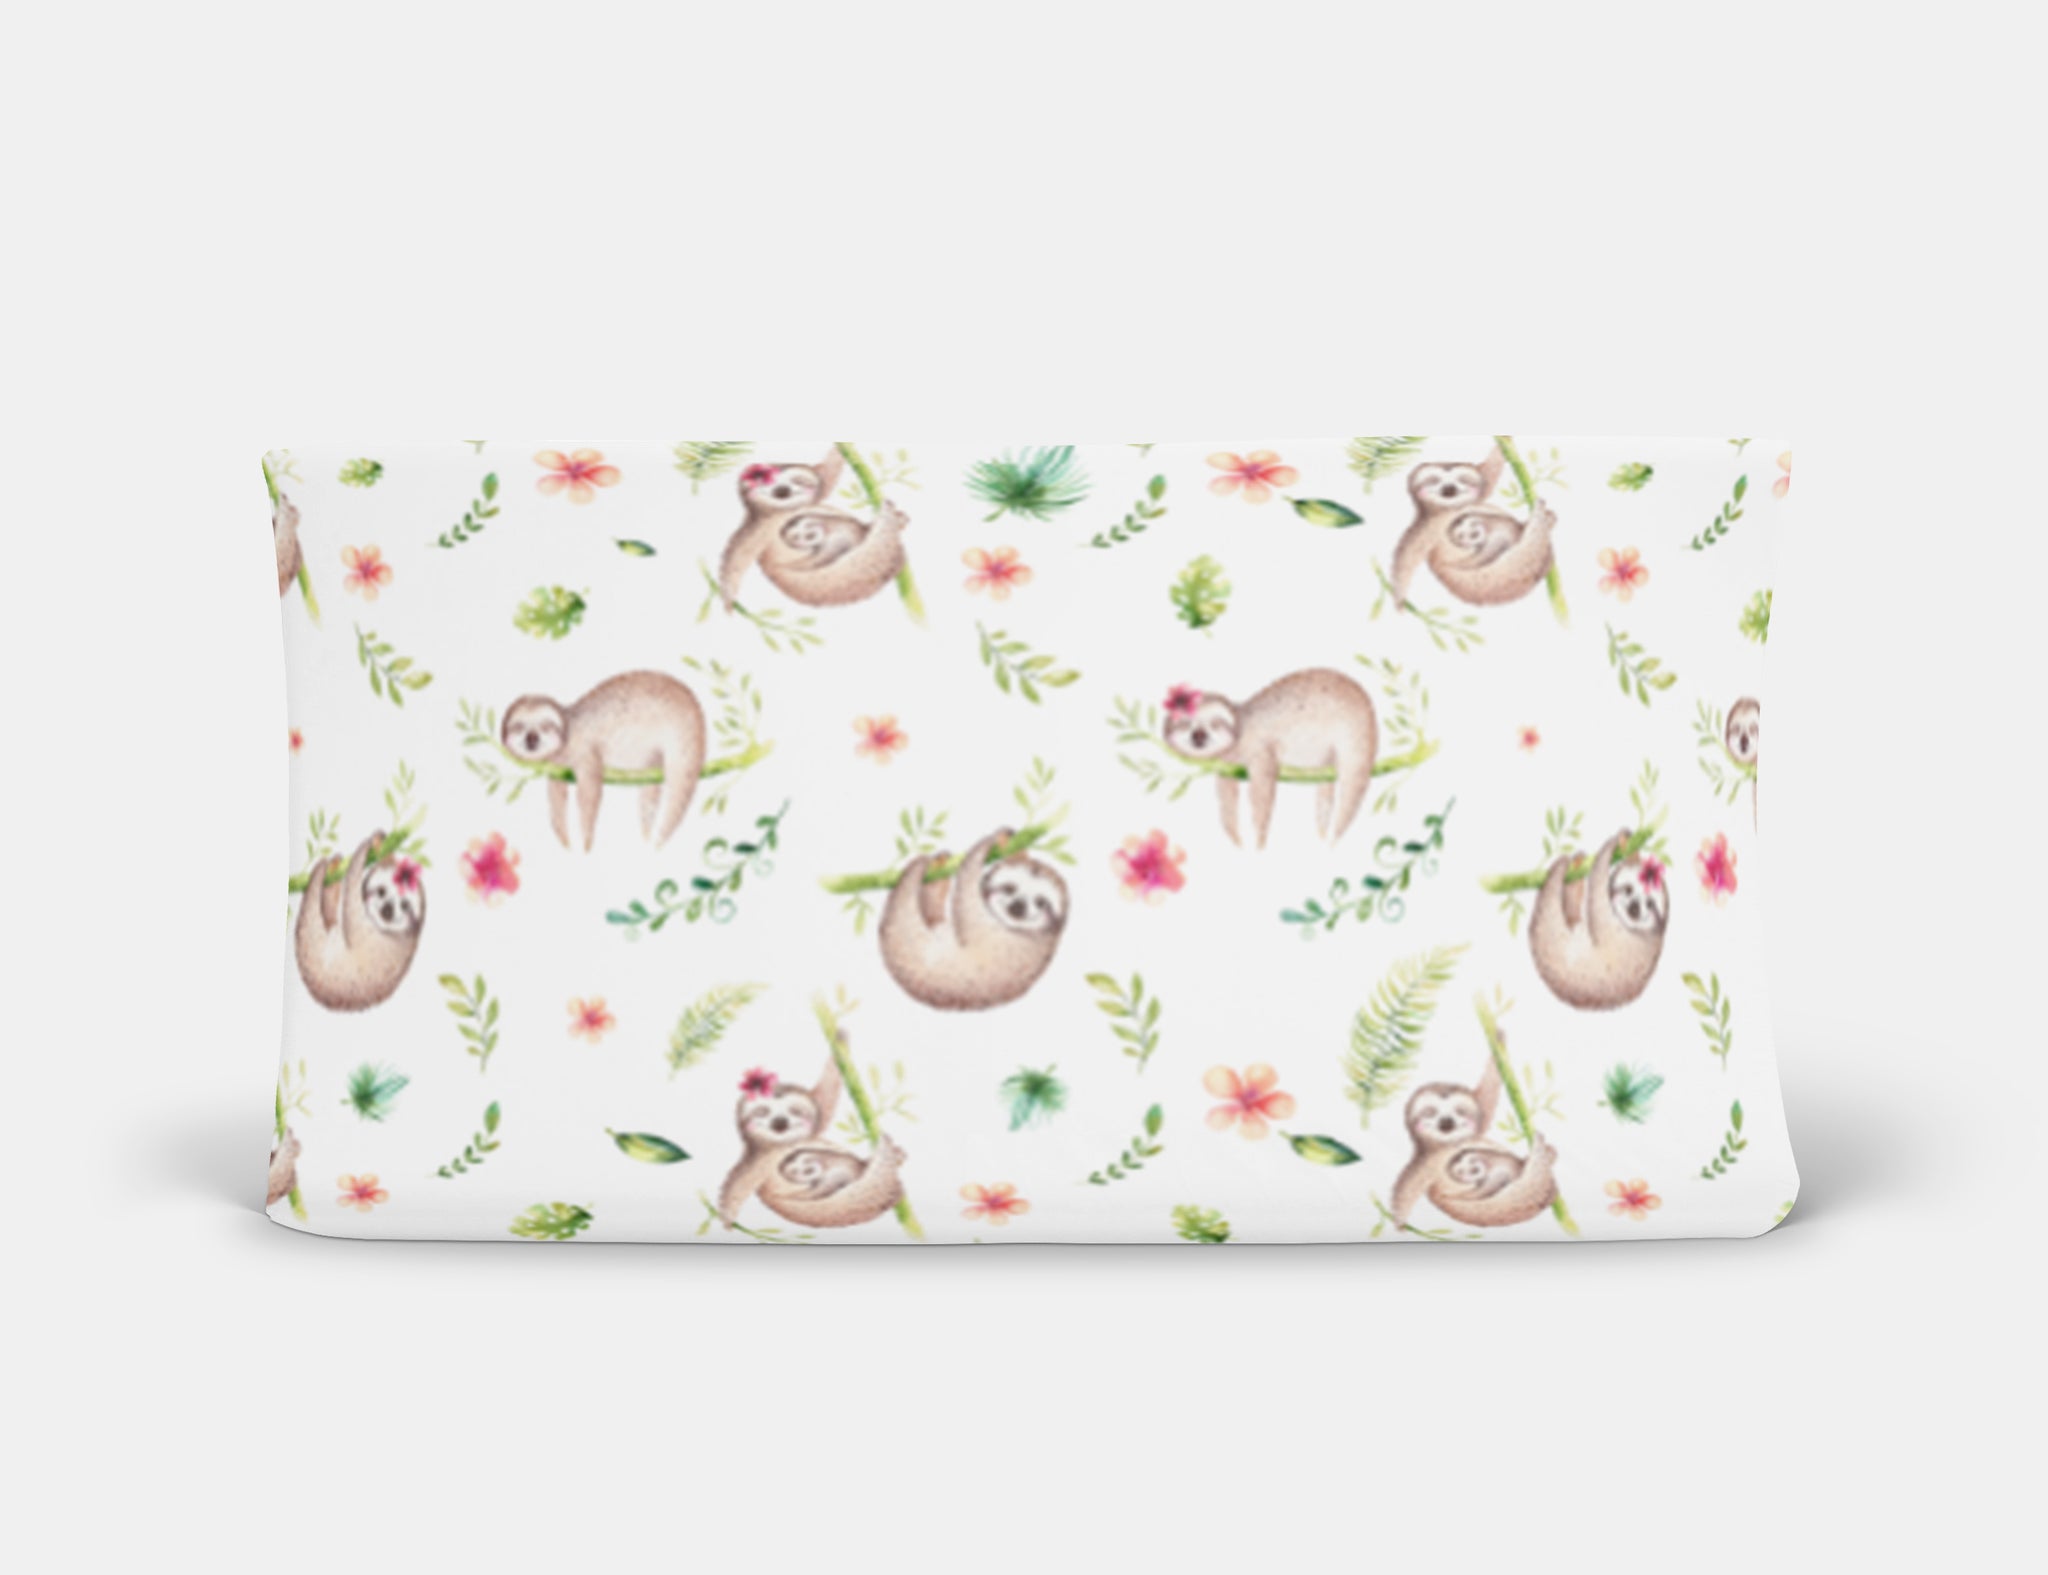 Sloth Changing Pad Cover